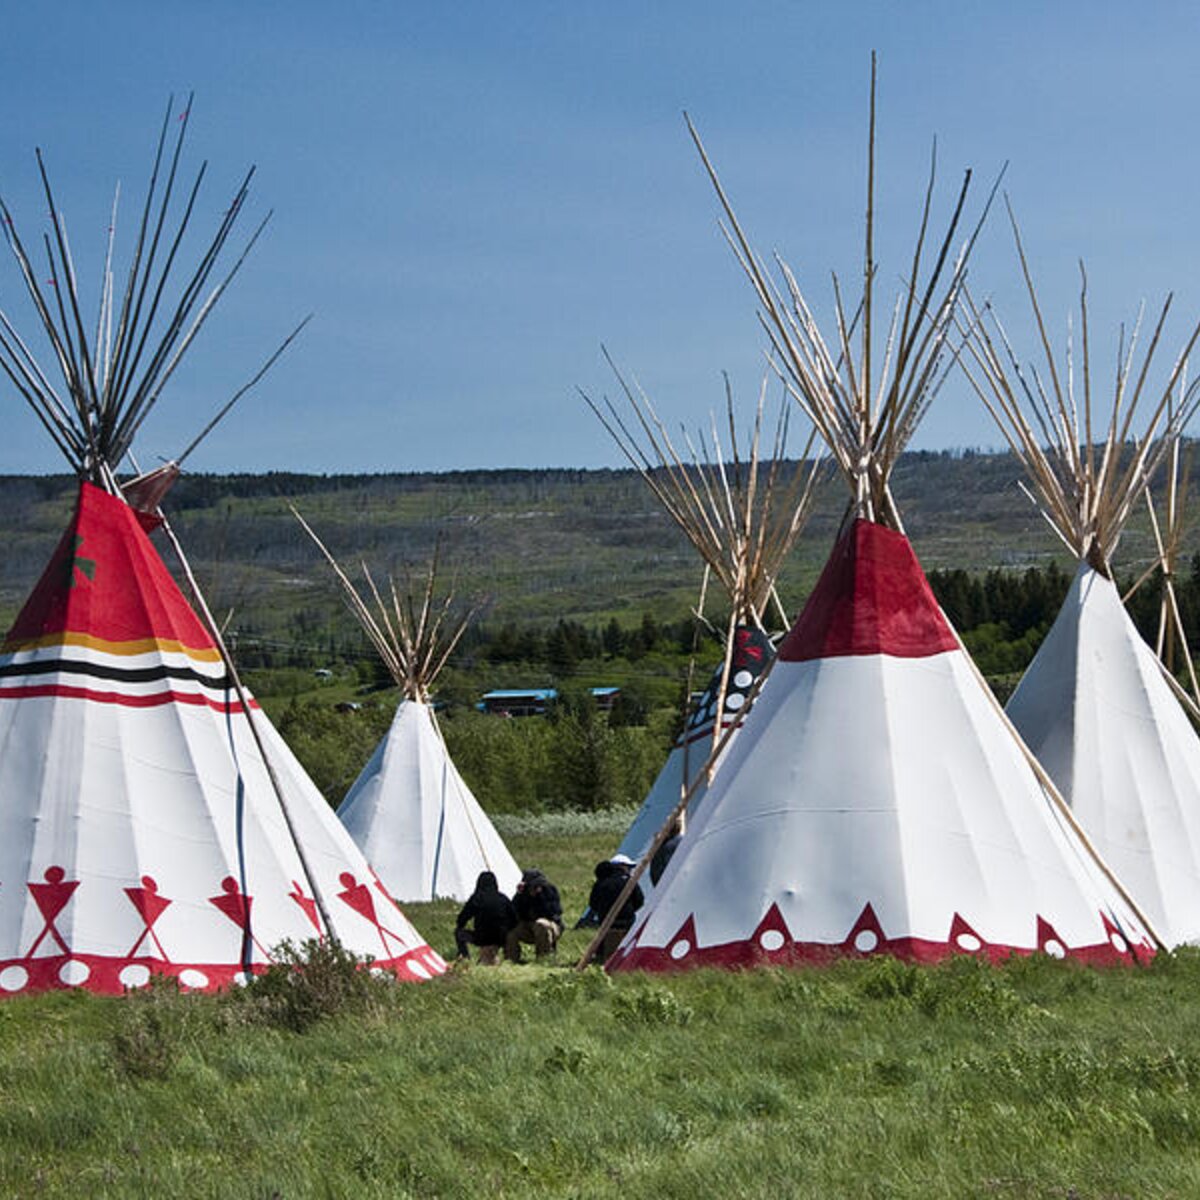 Powwow Teepees Of The Blackfoot Tribe By Glacier National Park No 3100 